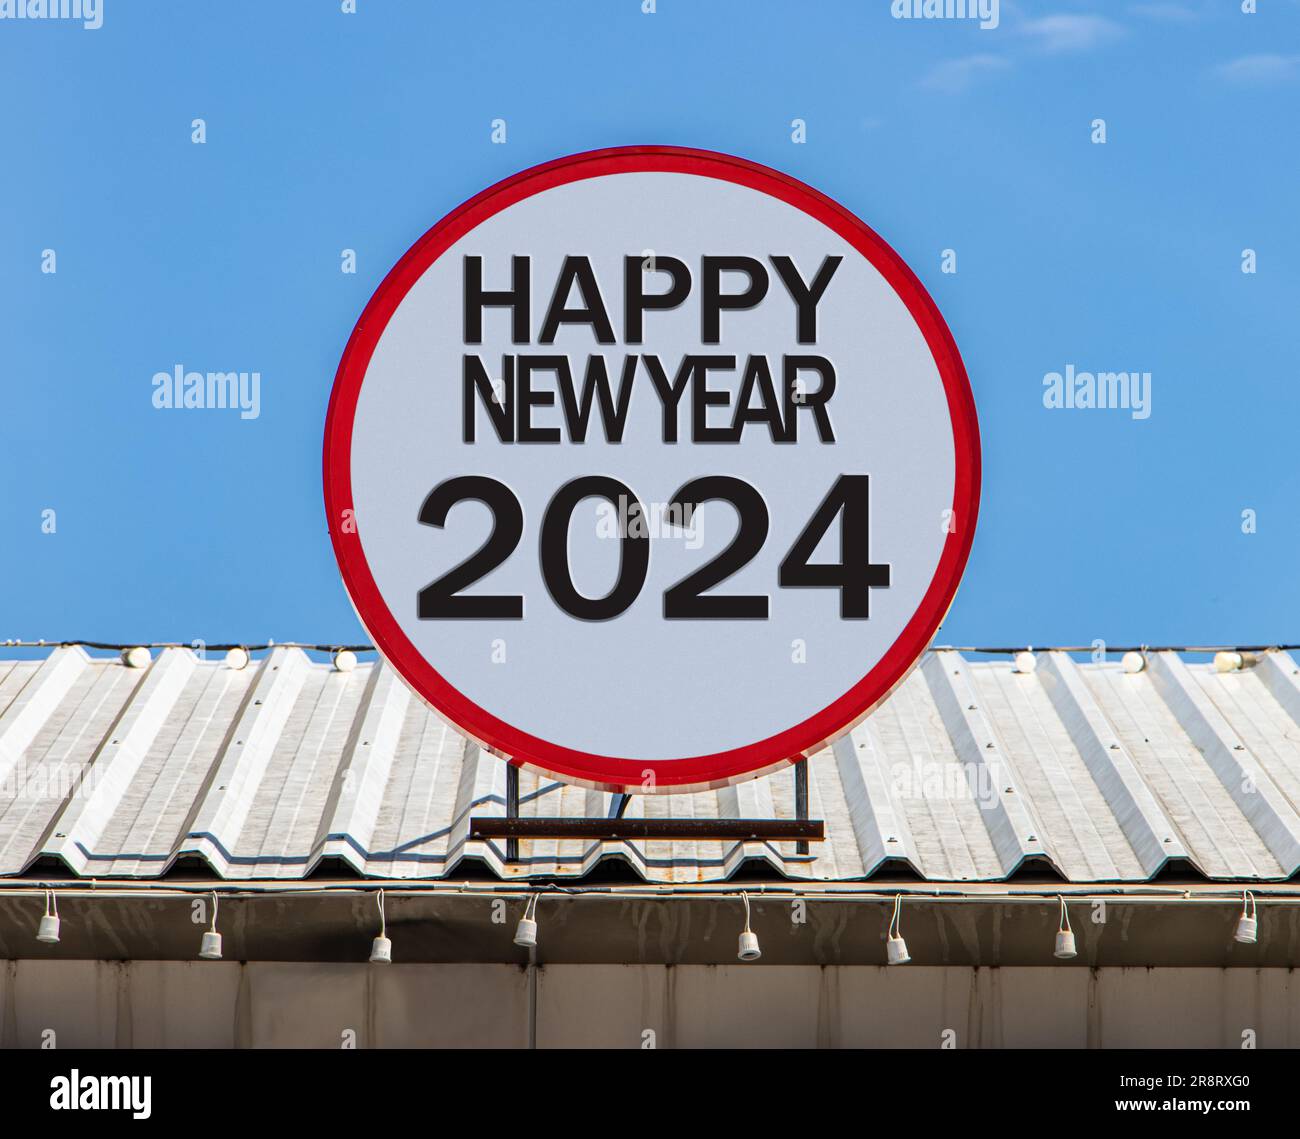 A Circle billboard with text Happy New Year 2024, is installed on a roof. Greeting for New Year. Stock Photo